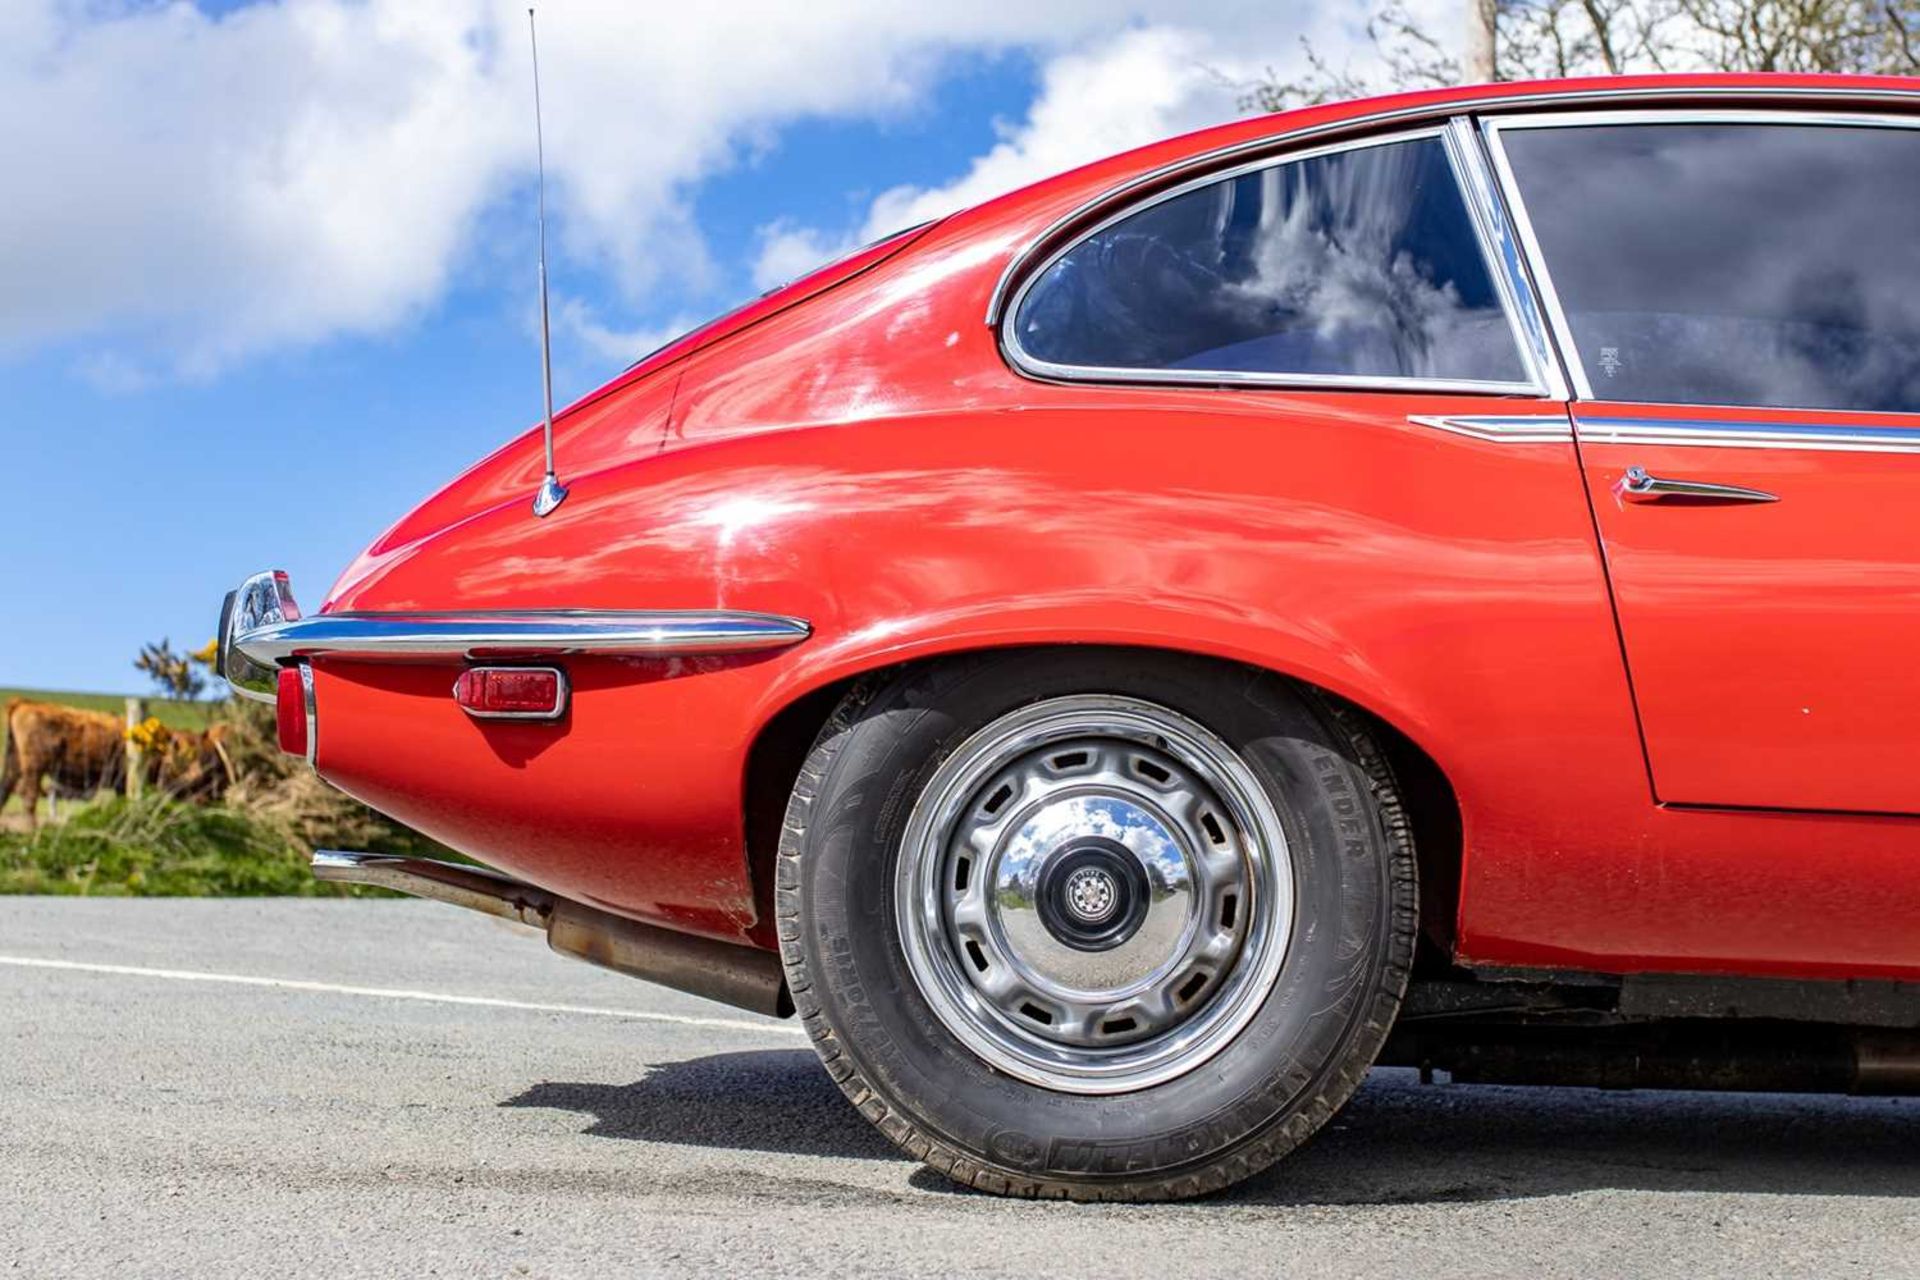 1973 Jaguar E-Type Coupe 5.3 V12 Three owners from new - Image 69 of 79